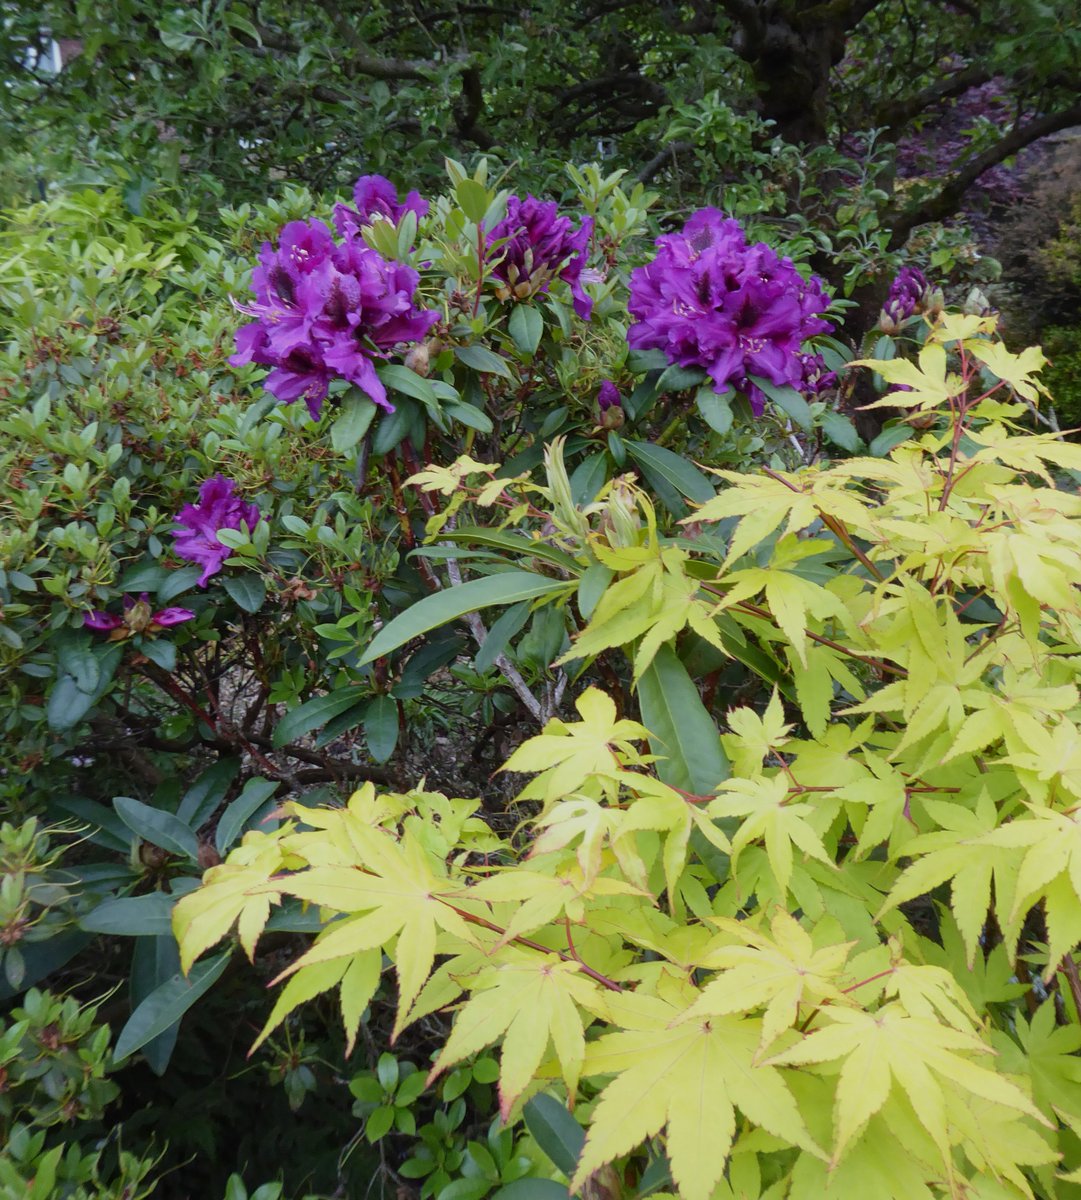 Rhododendron 'Purple Splendour' and acer palmatum 'Summer Gold' at #DevoniaGarden  I've been waiting years for the acer to get big enough for this shot